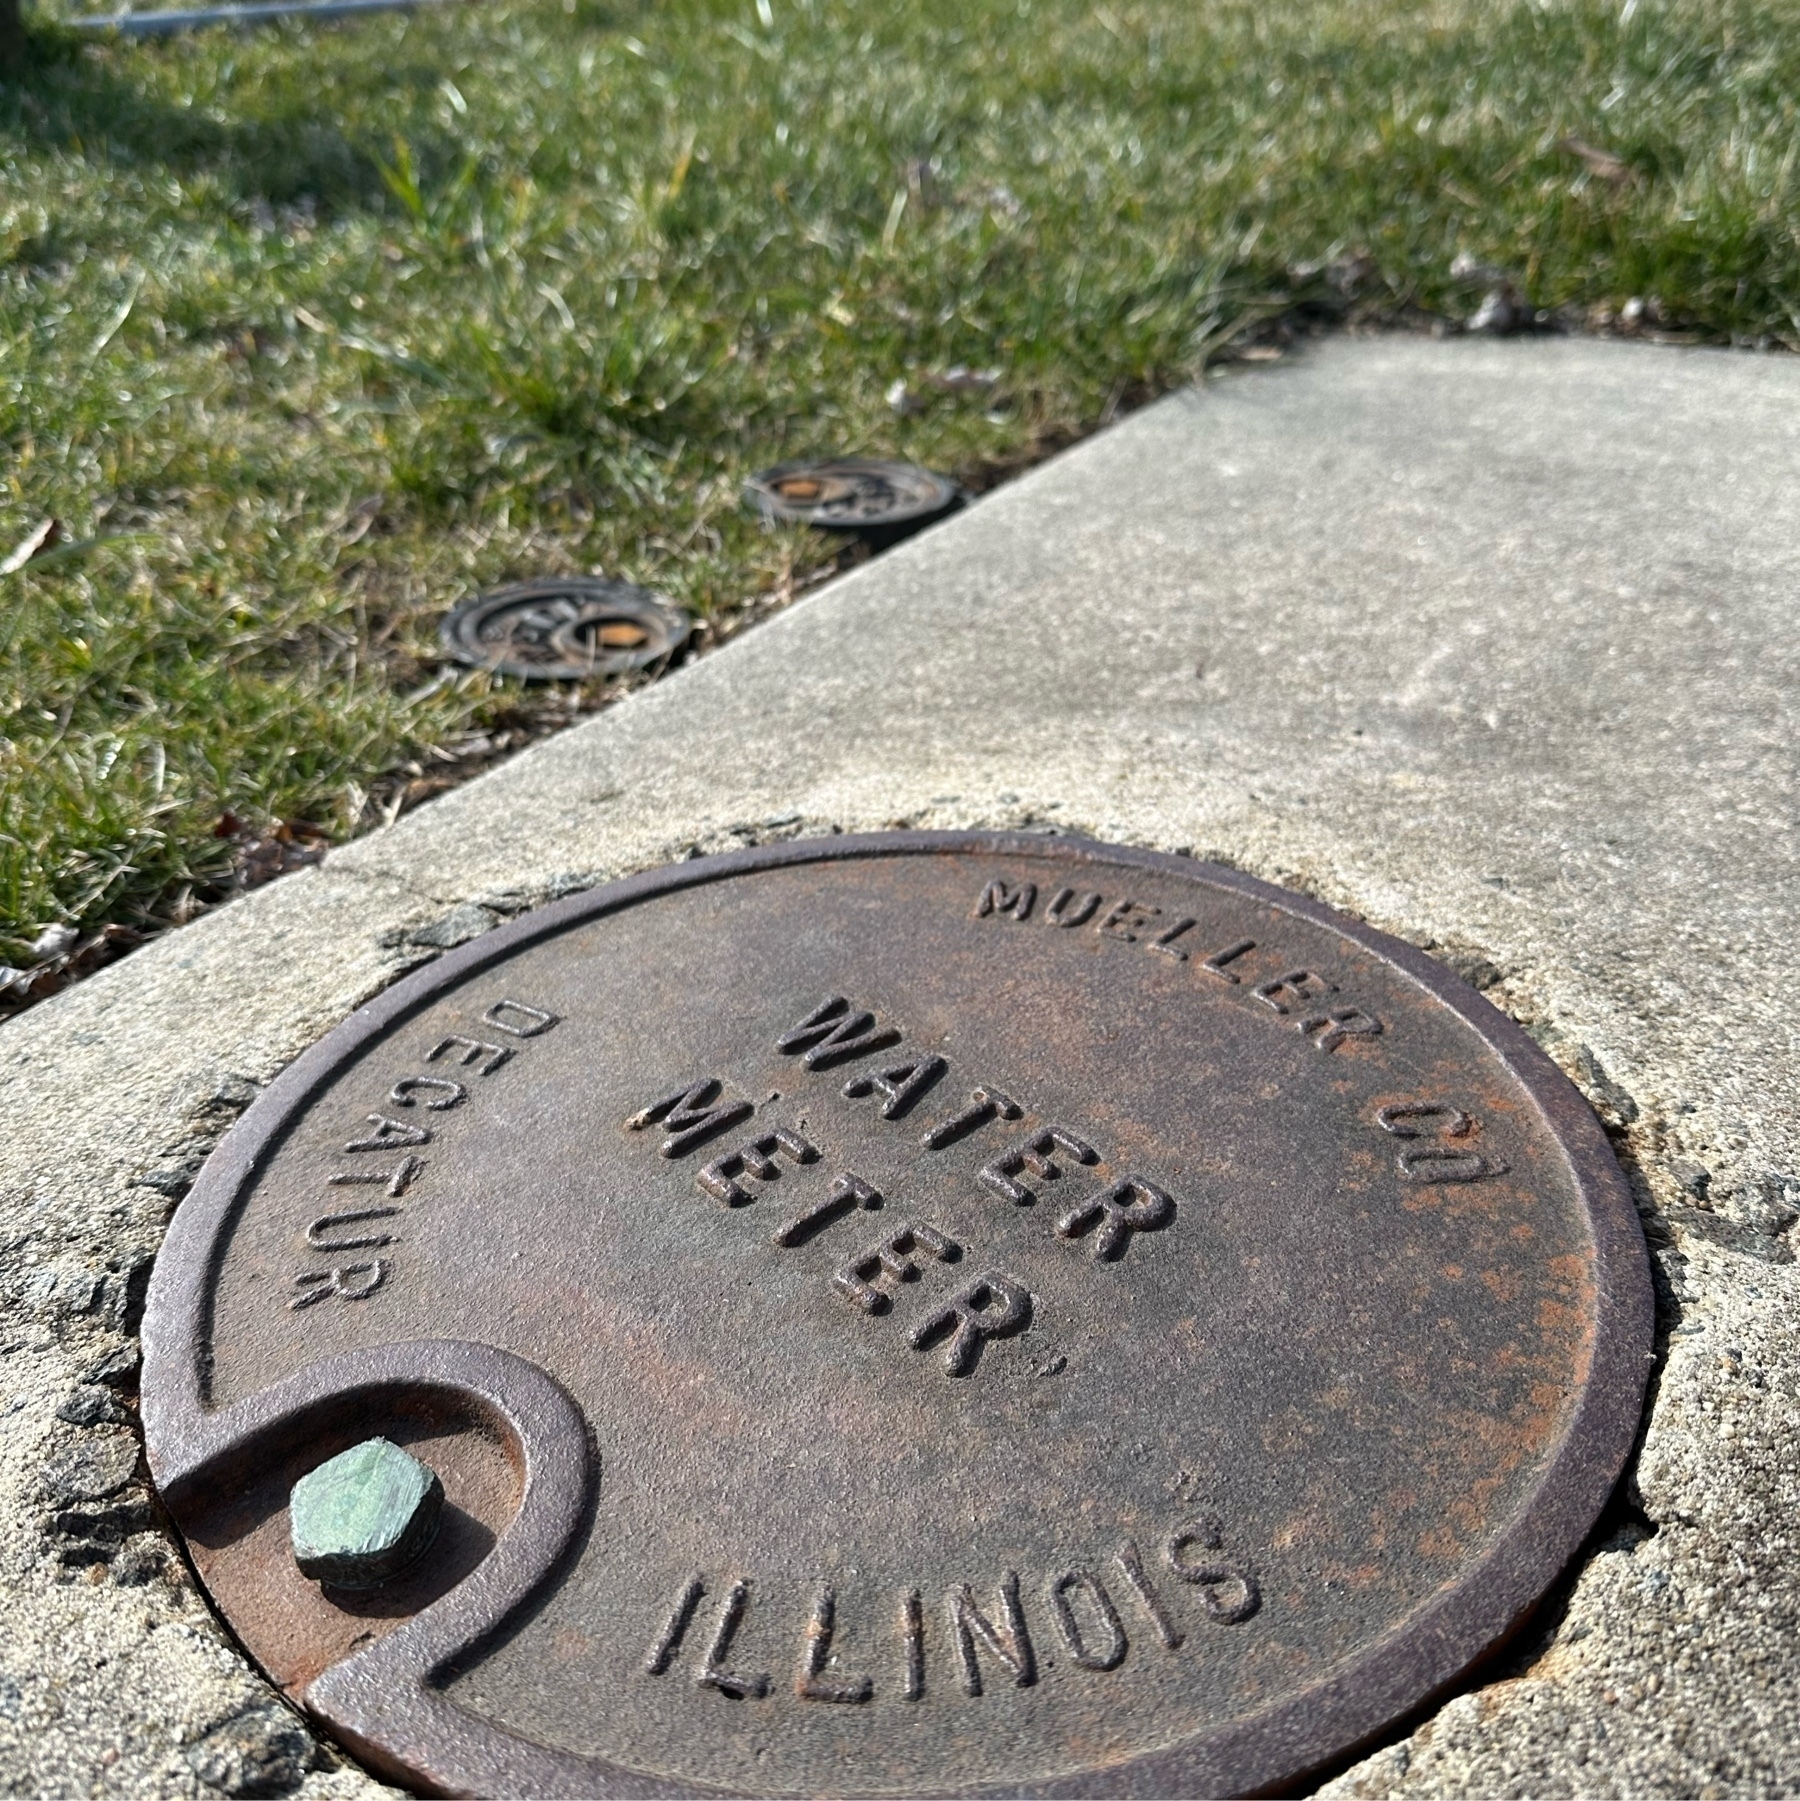 Photo of a metal water meter cover in cement, with the text "Water Meter" and "Decatur Illinois" visible.